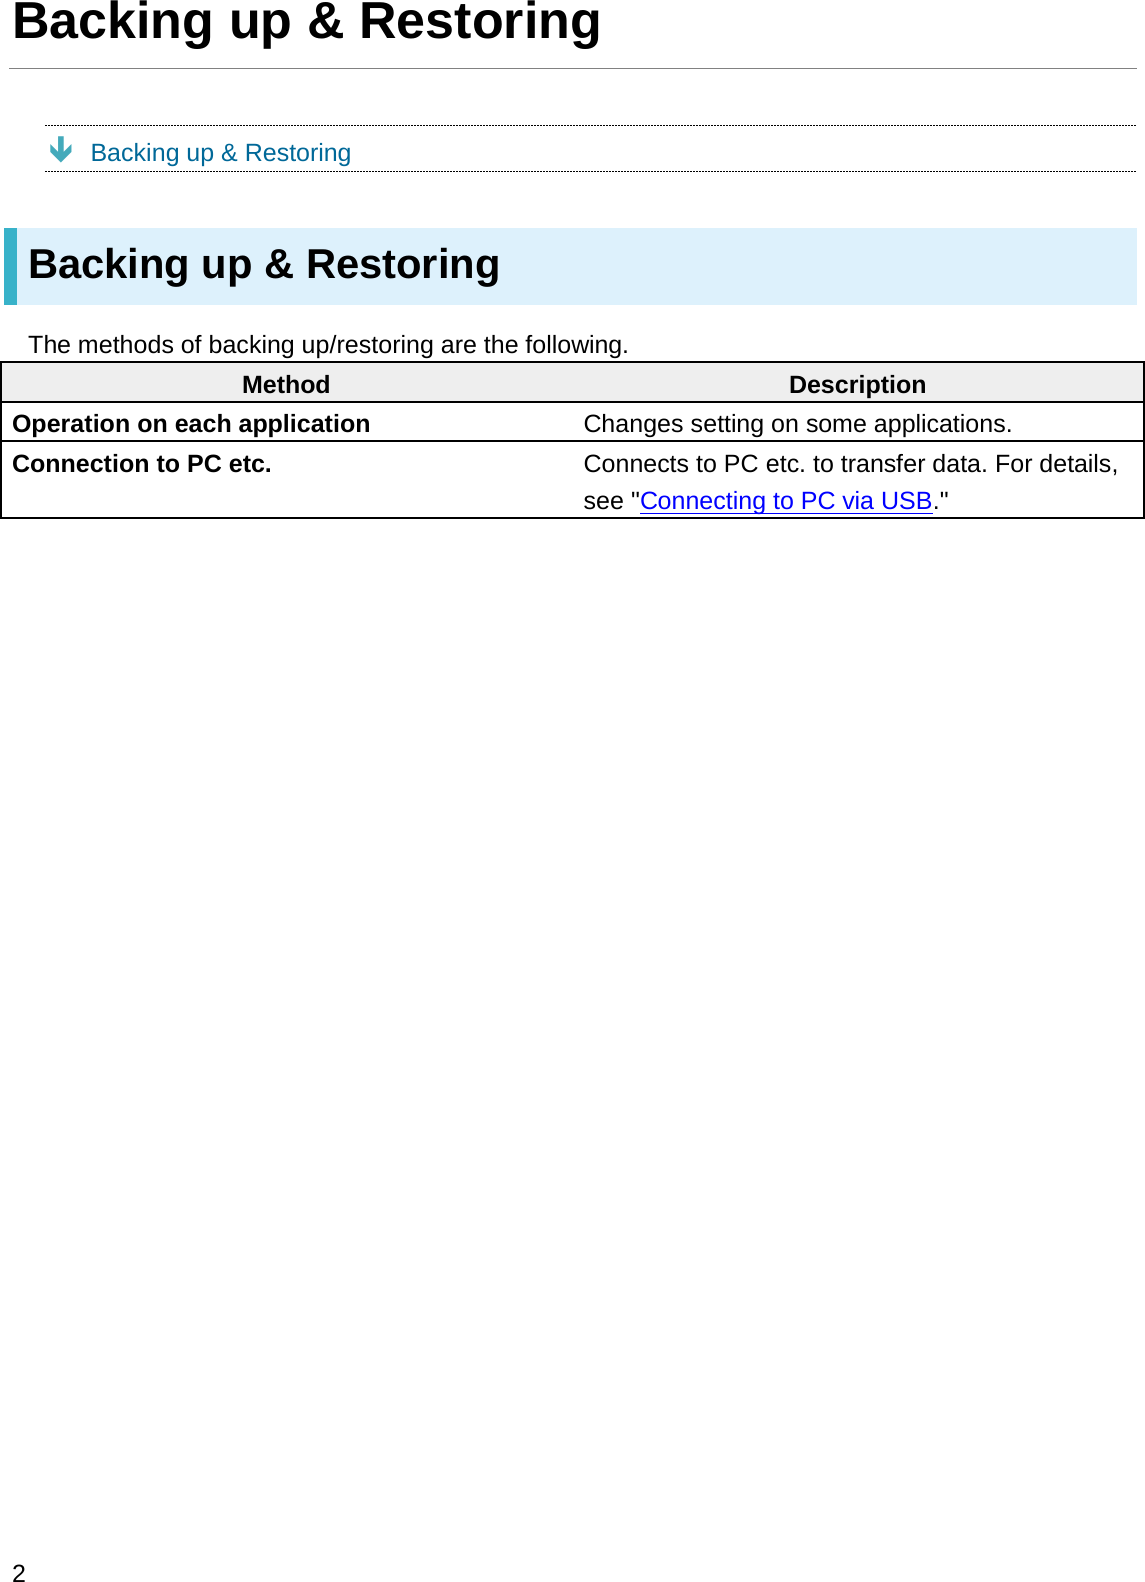 Backing up &amp; RestoringÐBacking up &amp; RestoringBacking up &amp; RestoringThe methods of backing up/restoring are the following.Method DescriptionOperation on each application Changes setting on some applications.Connection to PC etc. Connects to PC etc. to transfer data. For details, see &quot;Connecting to PC via USB.&quot;2